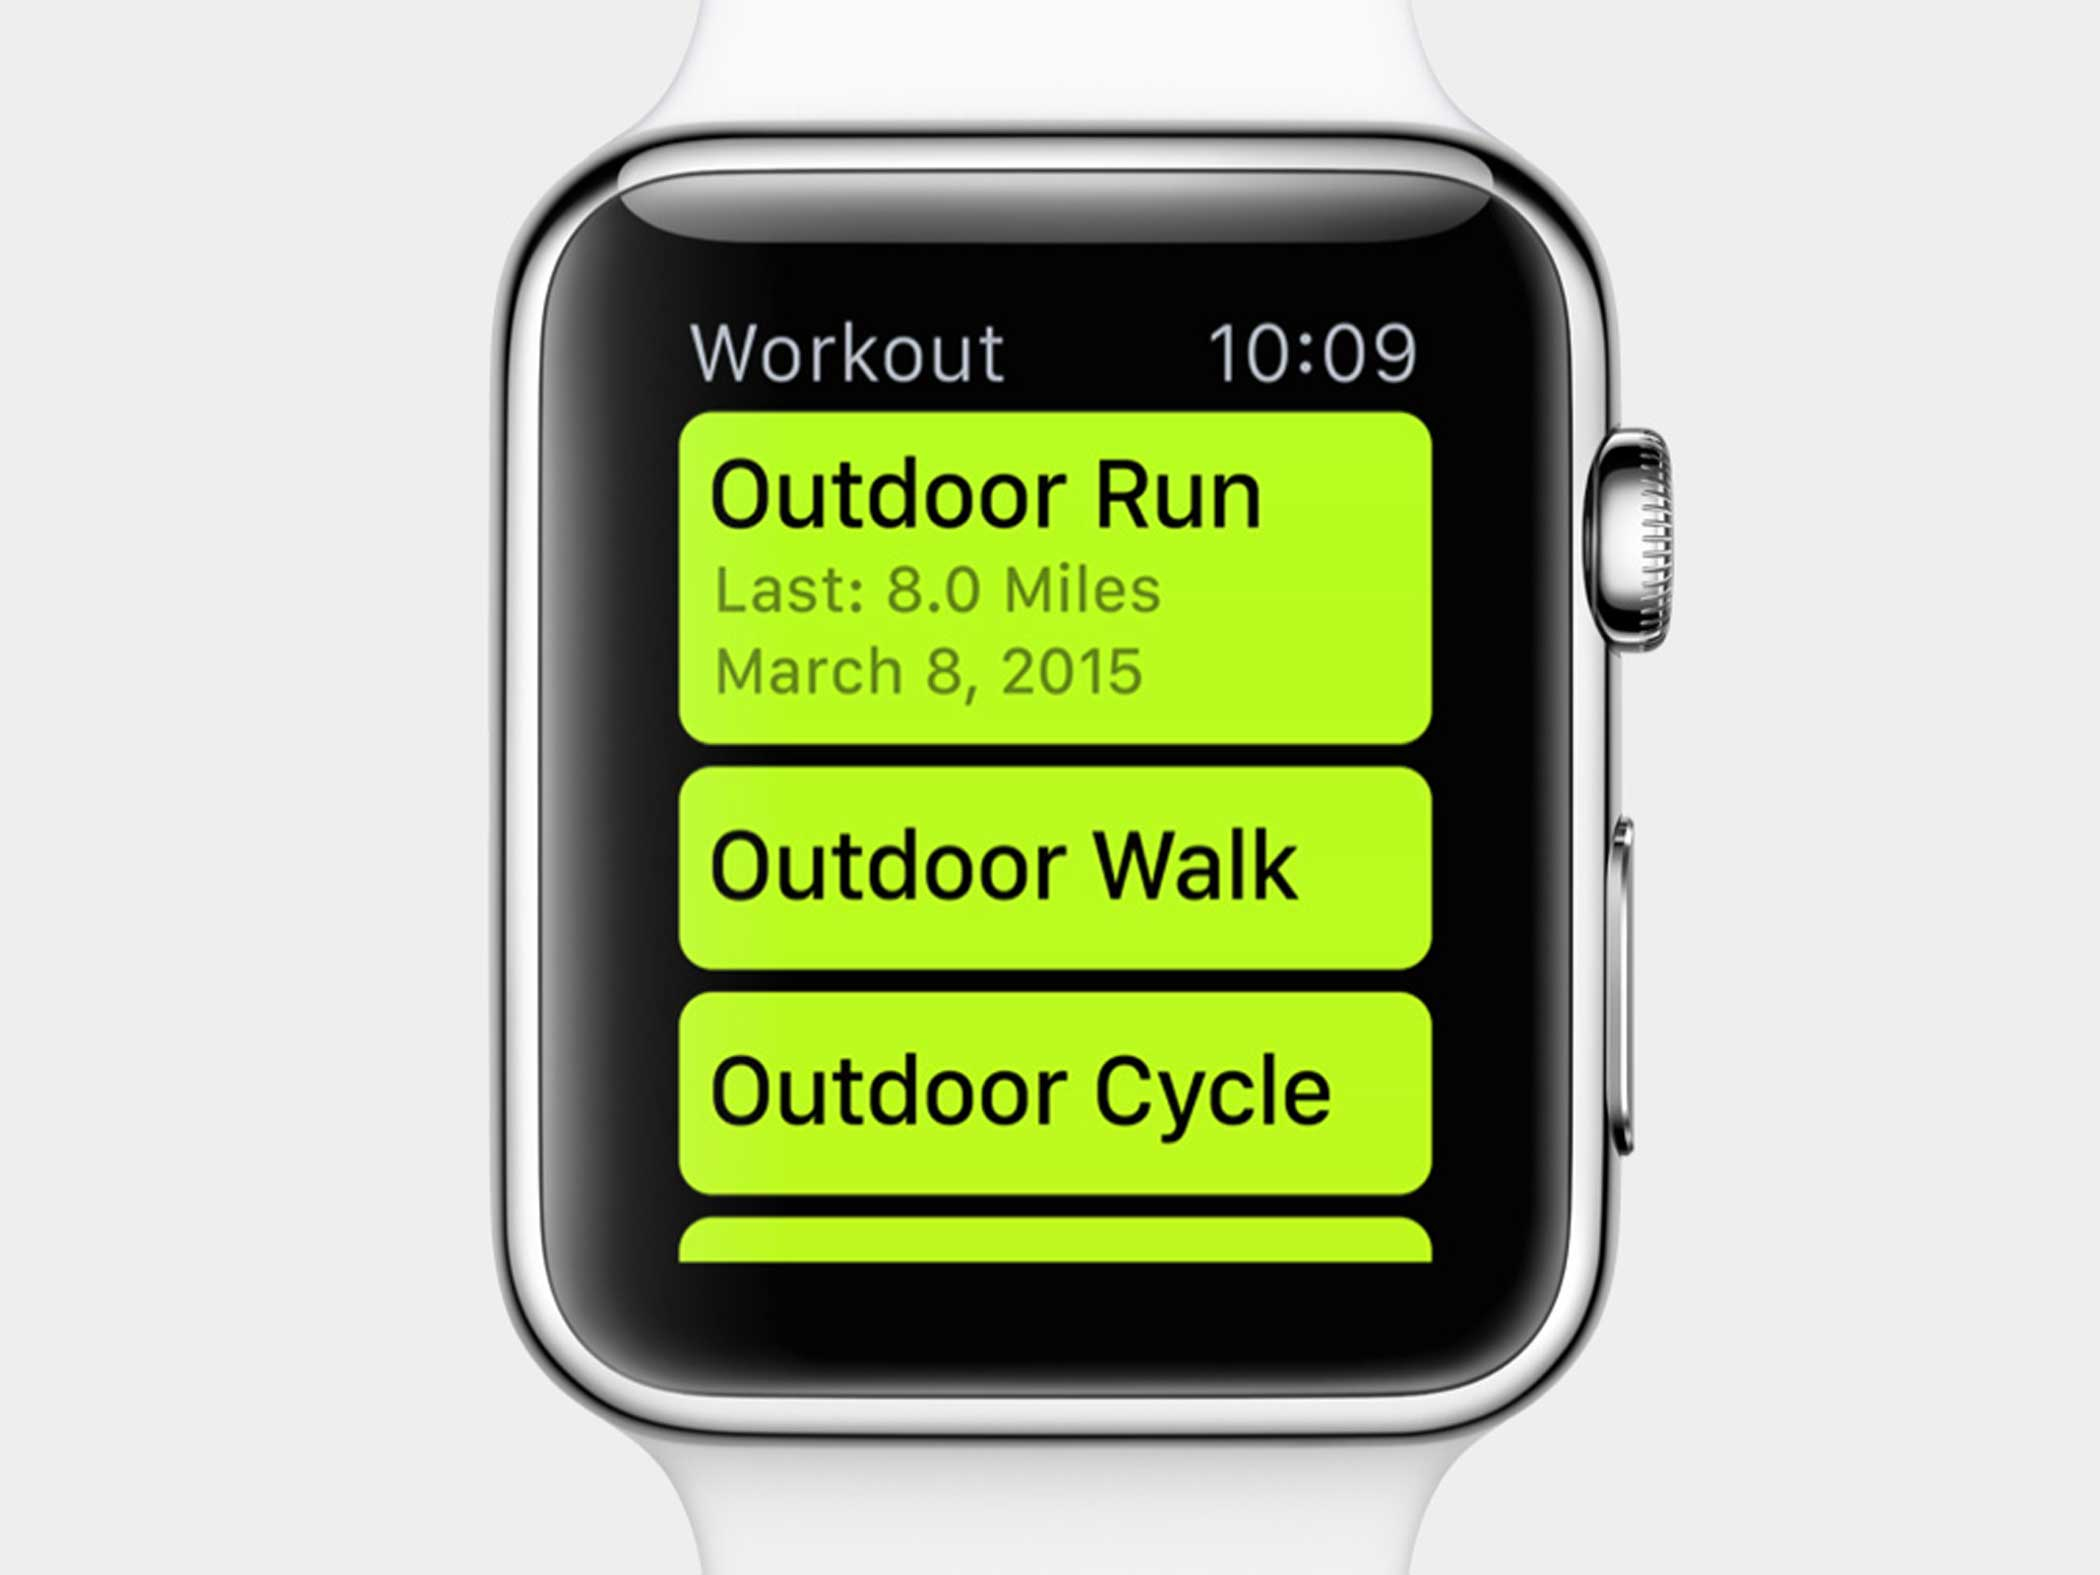 The Workout app provides more detailed measurement during specific activities.